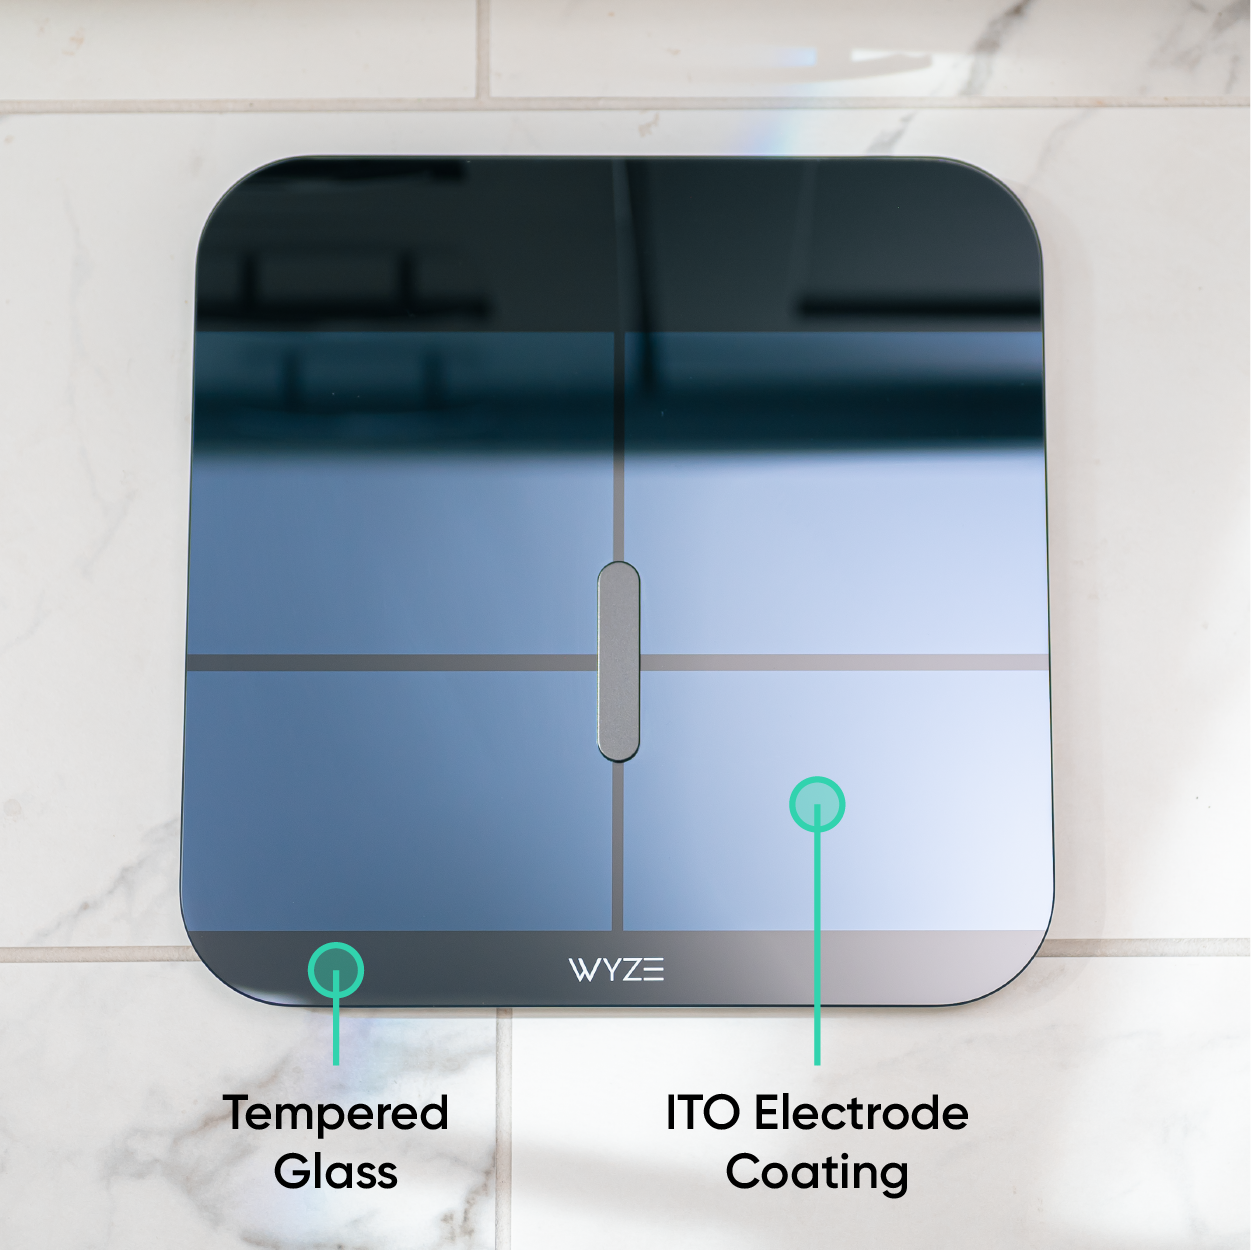 Black Scale X text overlays says, "Luxurious ITO glass electrodes give accurate measurements no matter where you step."